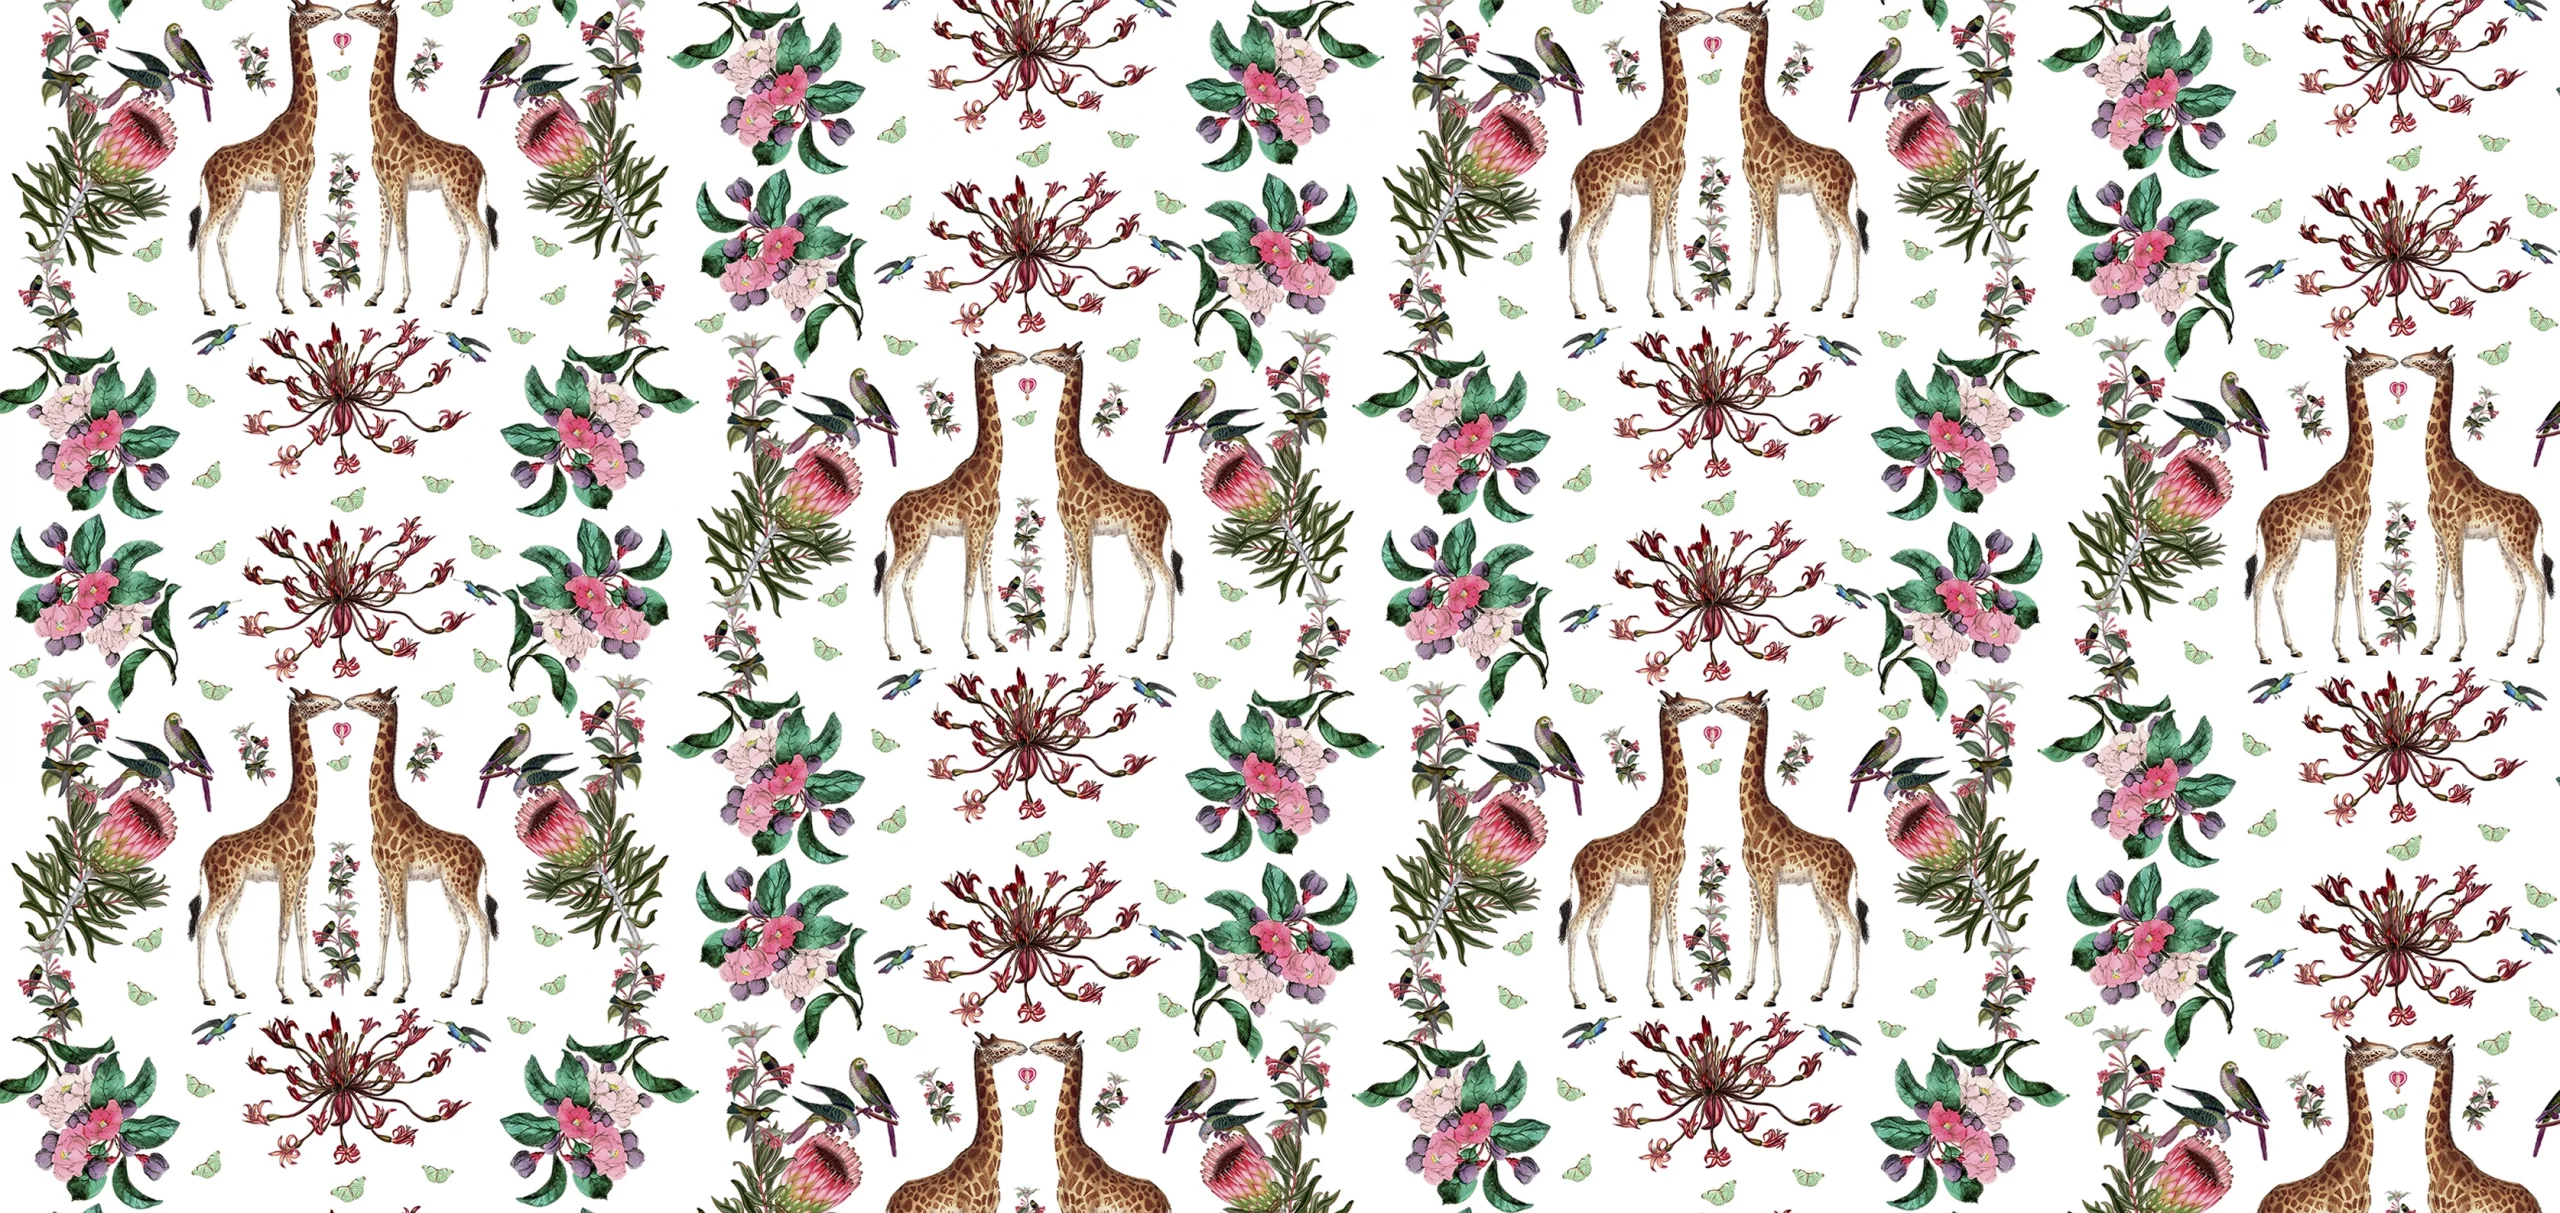 Ark Paper Studio Collection APS08 Two Giraffes, protea, flowers and greenery with white background print